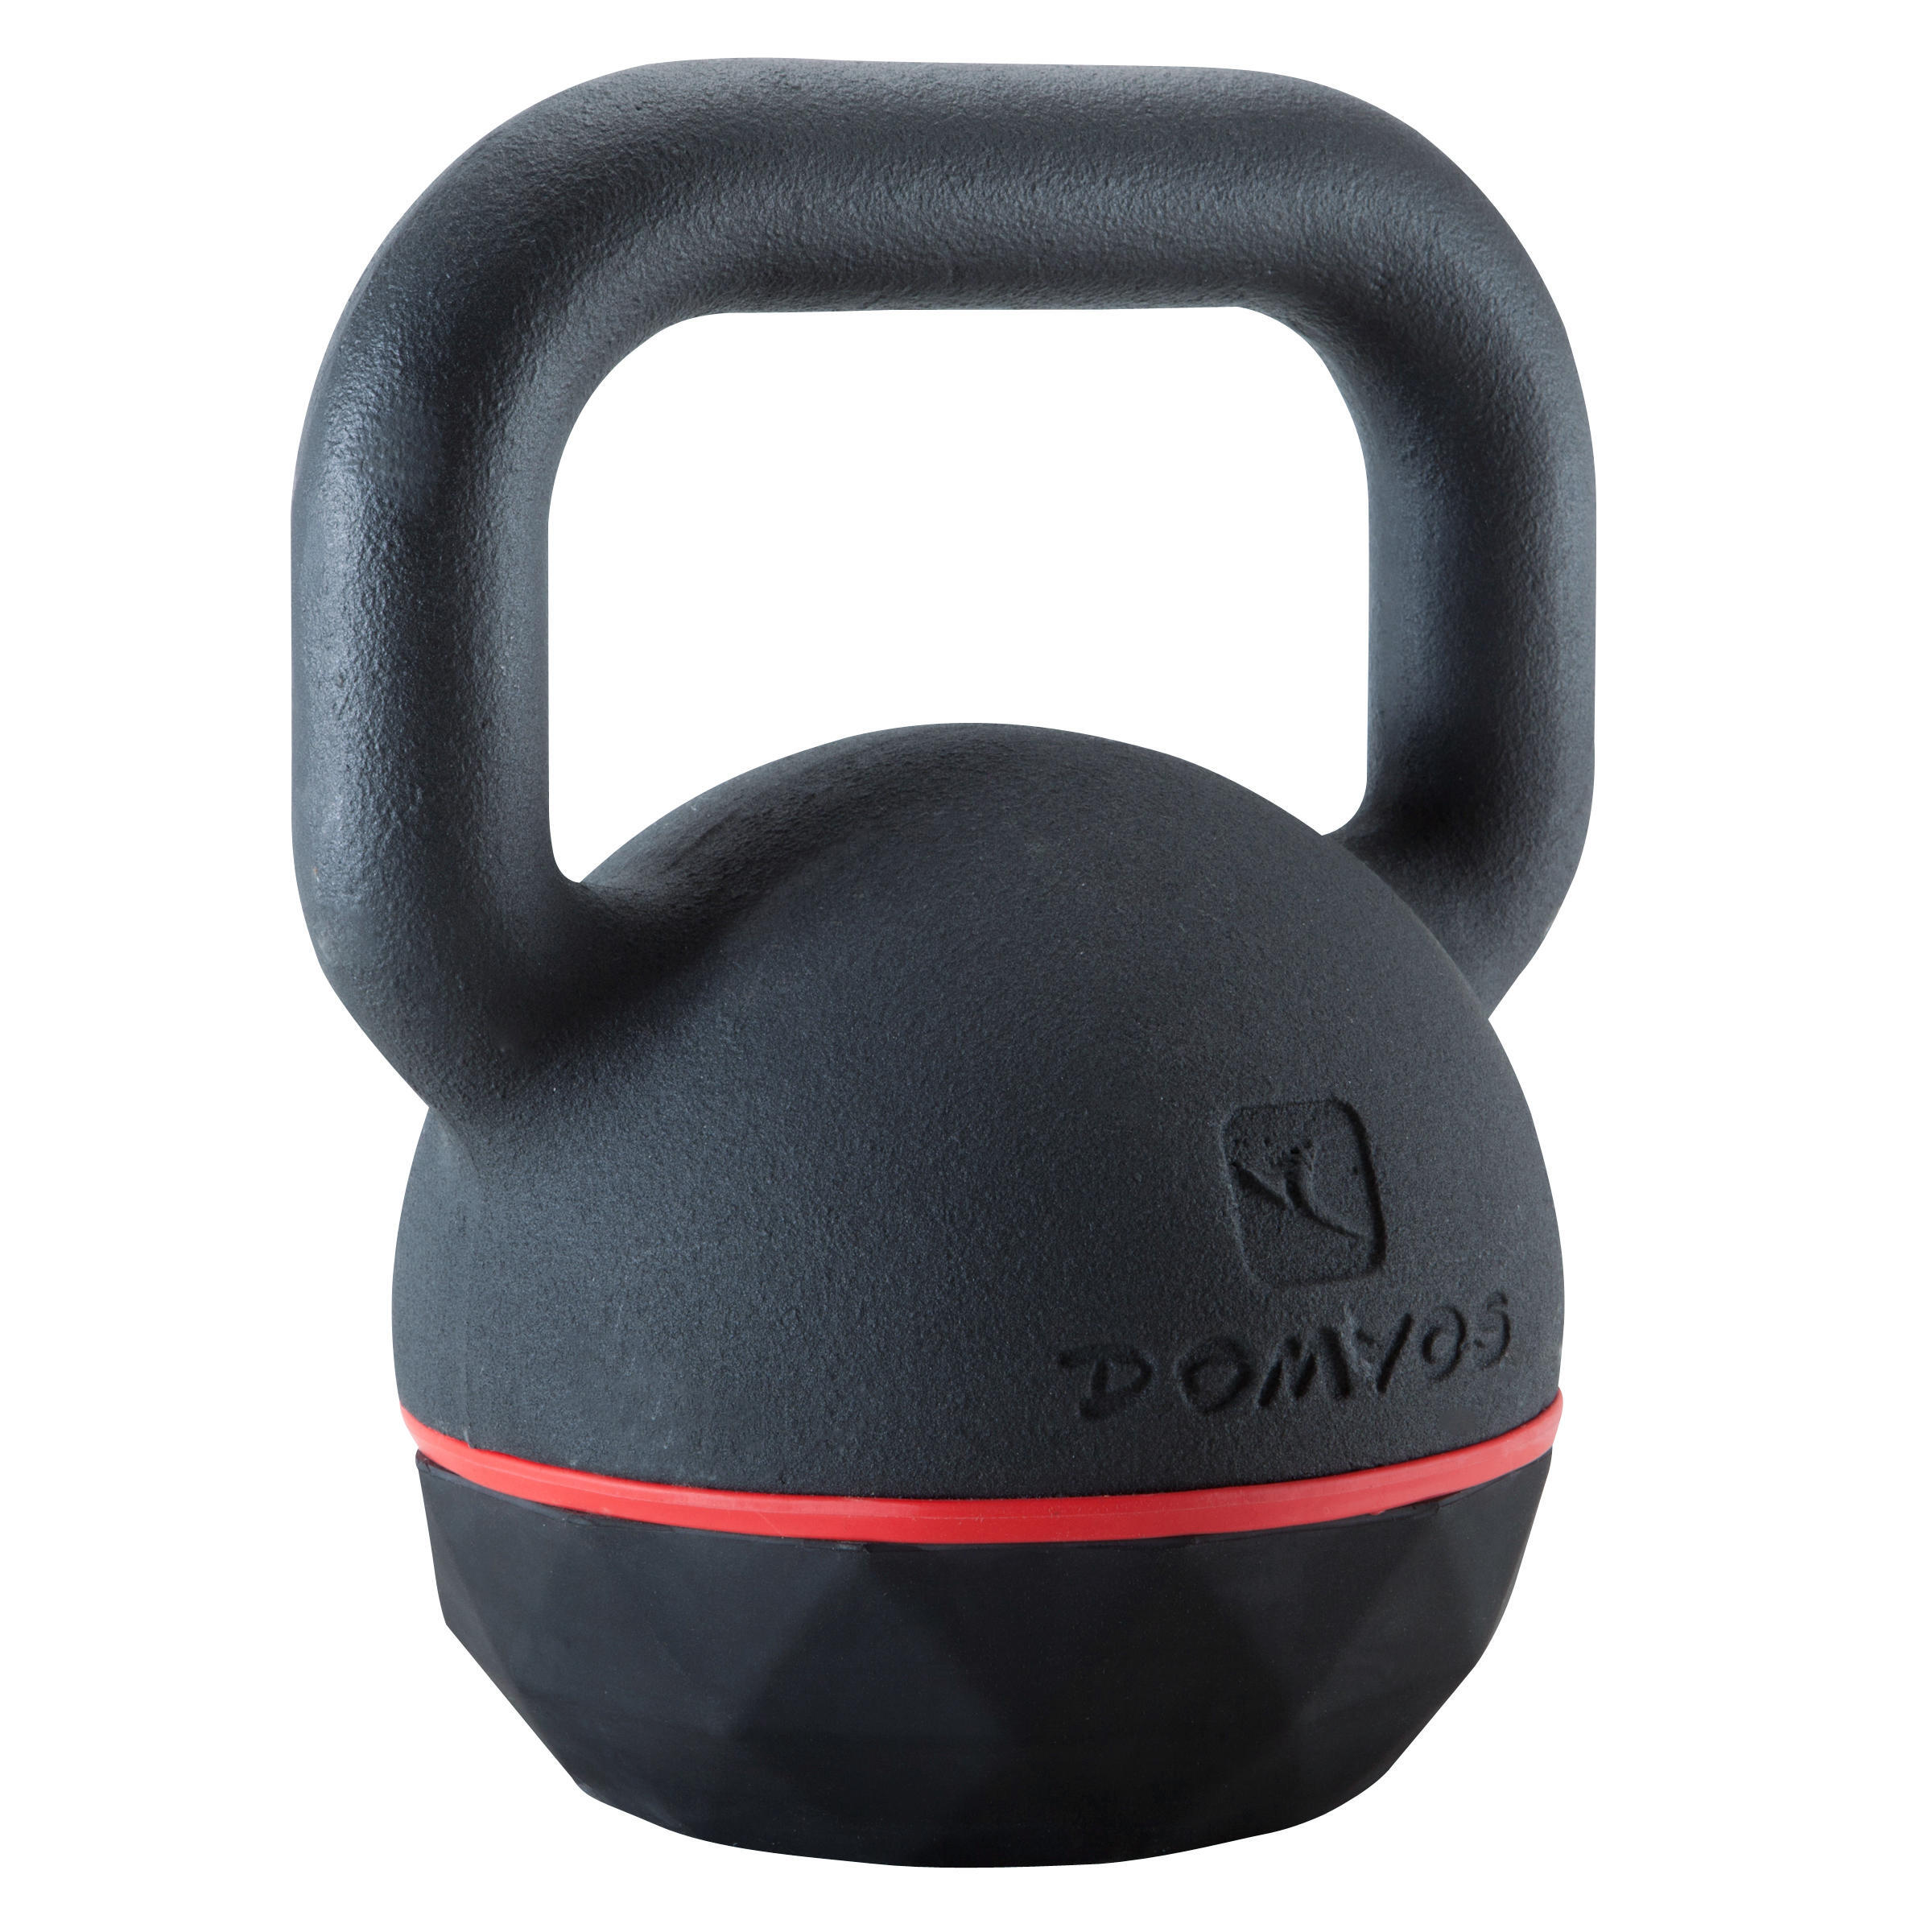 Cast Iron Kettlebell with Rubber Base - 20 kg 2/9